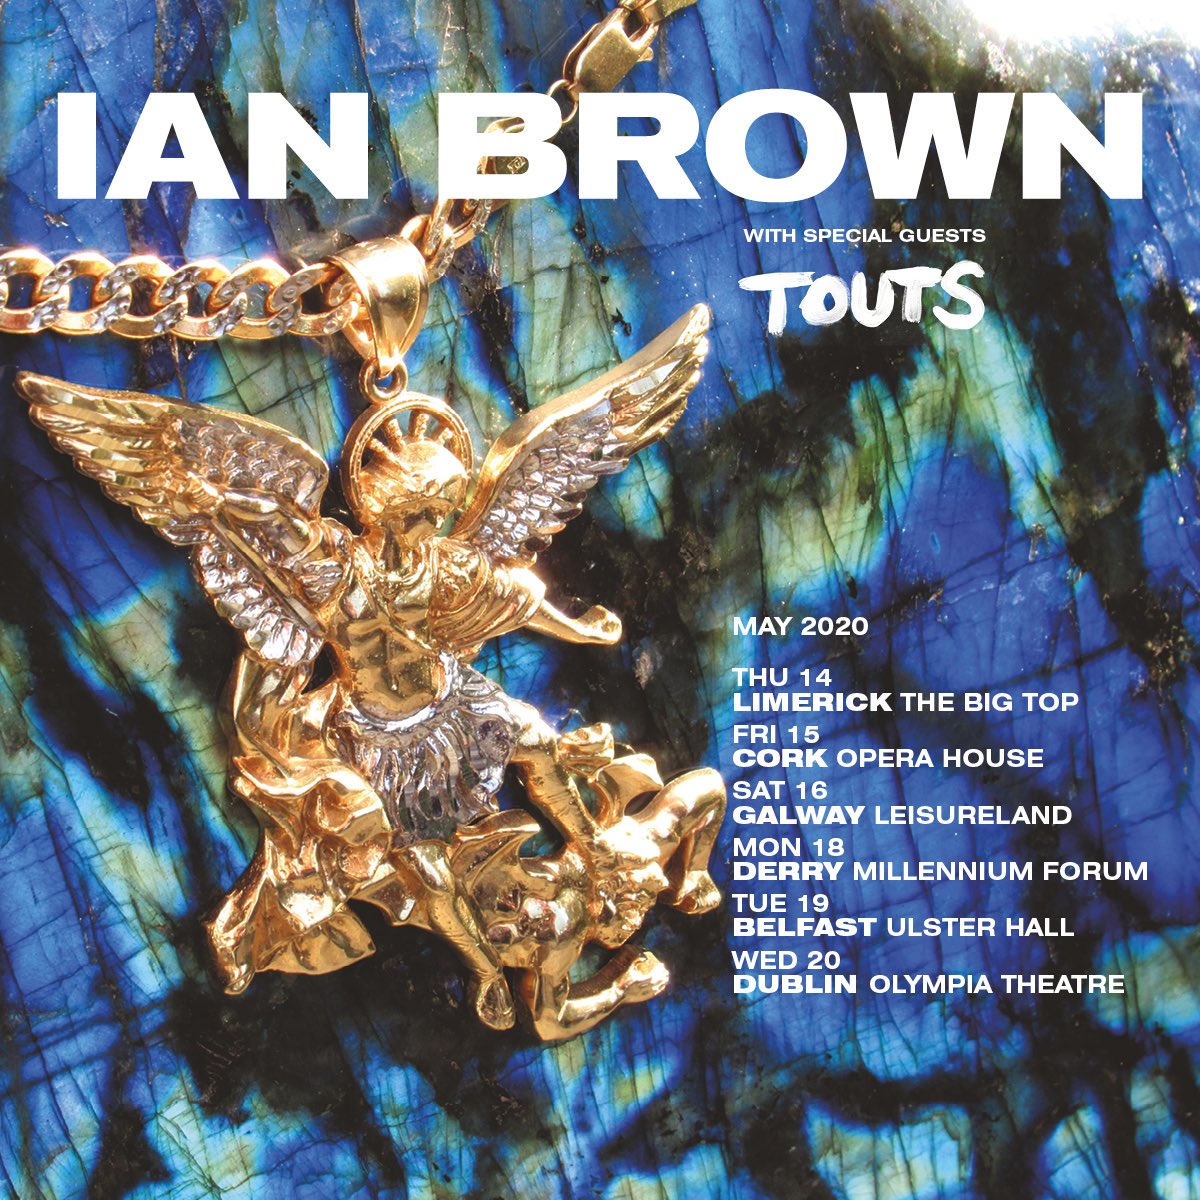 Ian Brown will be touring across Ireland in May 2020. Tickets are on sale at 9am on Fri 28 Feb from: ticketmaster.ie/ian-brown-tick… MAY 14 Limerick @LiveAtTheBigTop 15 @CorkOperaHouse 16 Galway Leisureland 18 Derry @MillenniumForum 19 Belfast @UlsterHall 20 Dublin @olympiatheatre